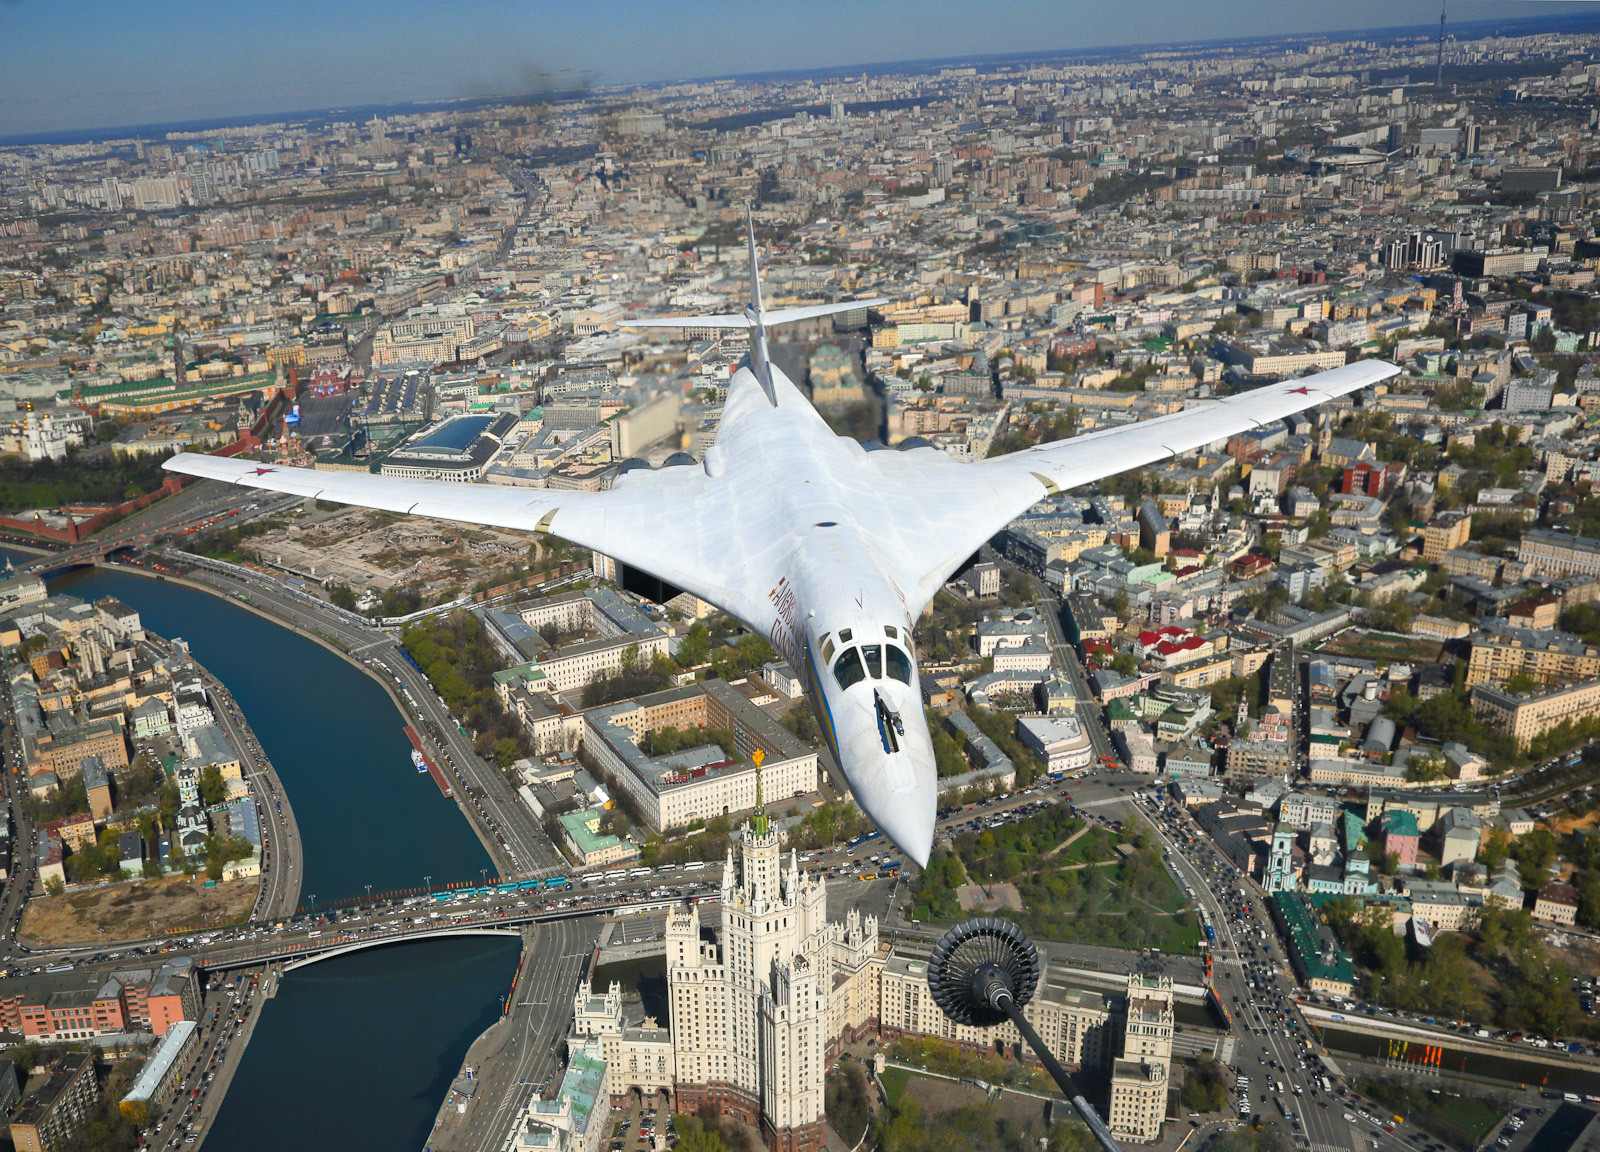 The Tupolev Tu-160 strategic bomber in the sky above Moscow.